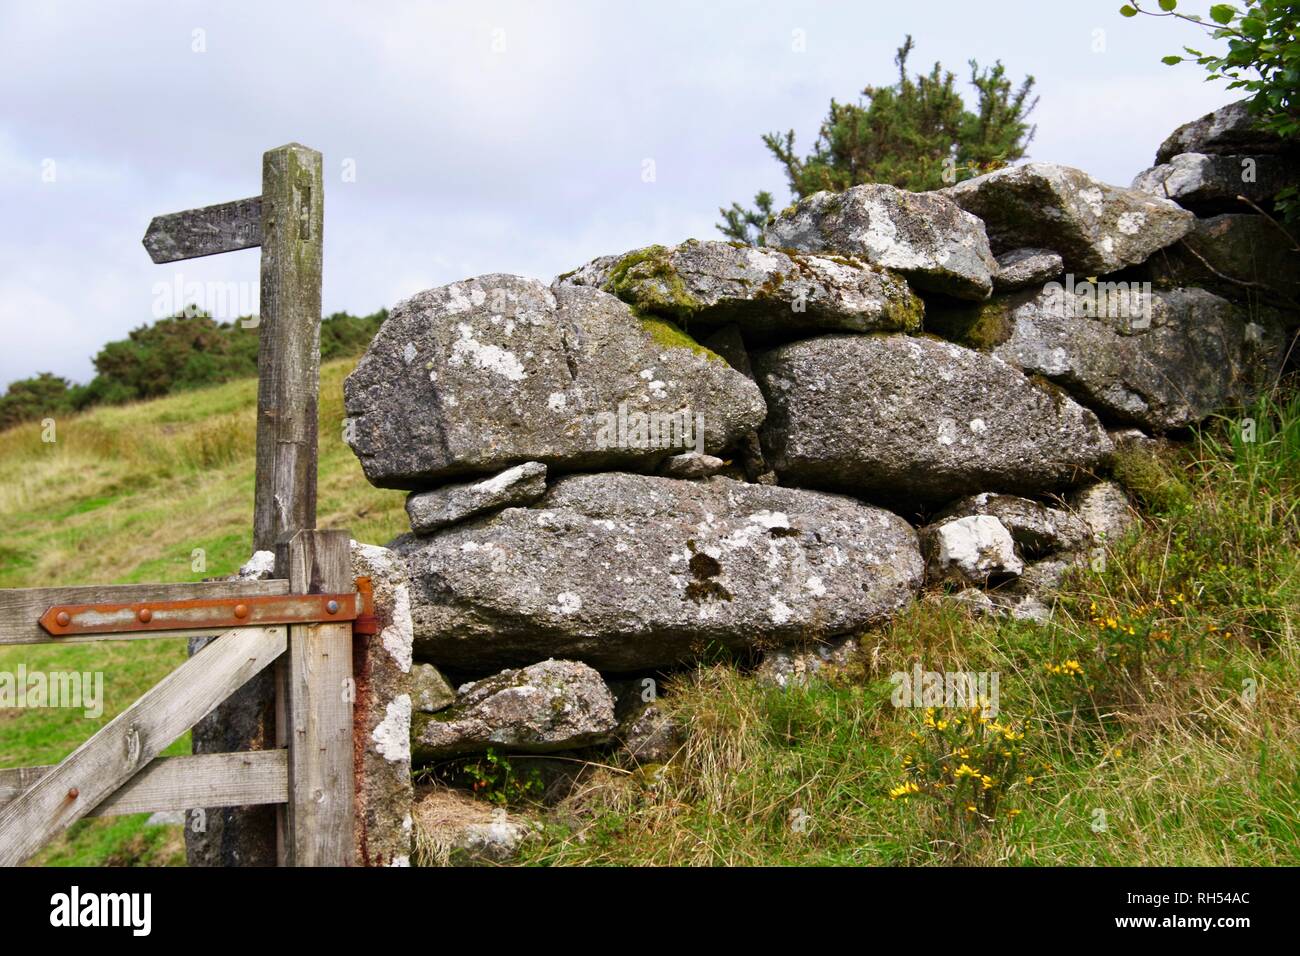 Wooden Farm Gate and Drystone Wall at Wistmans Wood Car Park. Dartmoor National Park, Devon, UK. Stock Photo